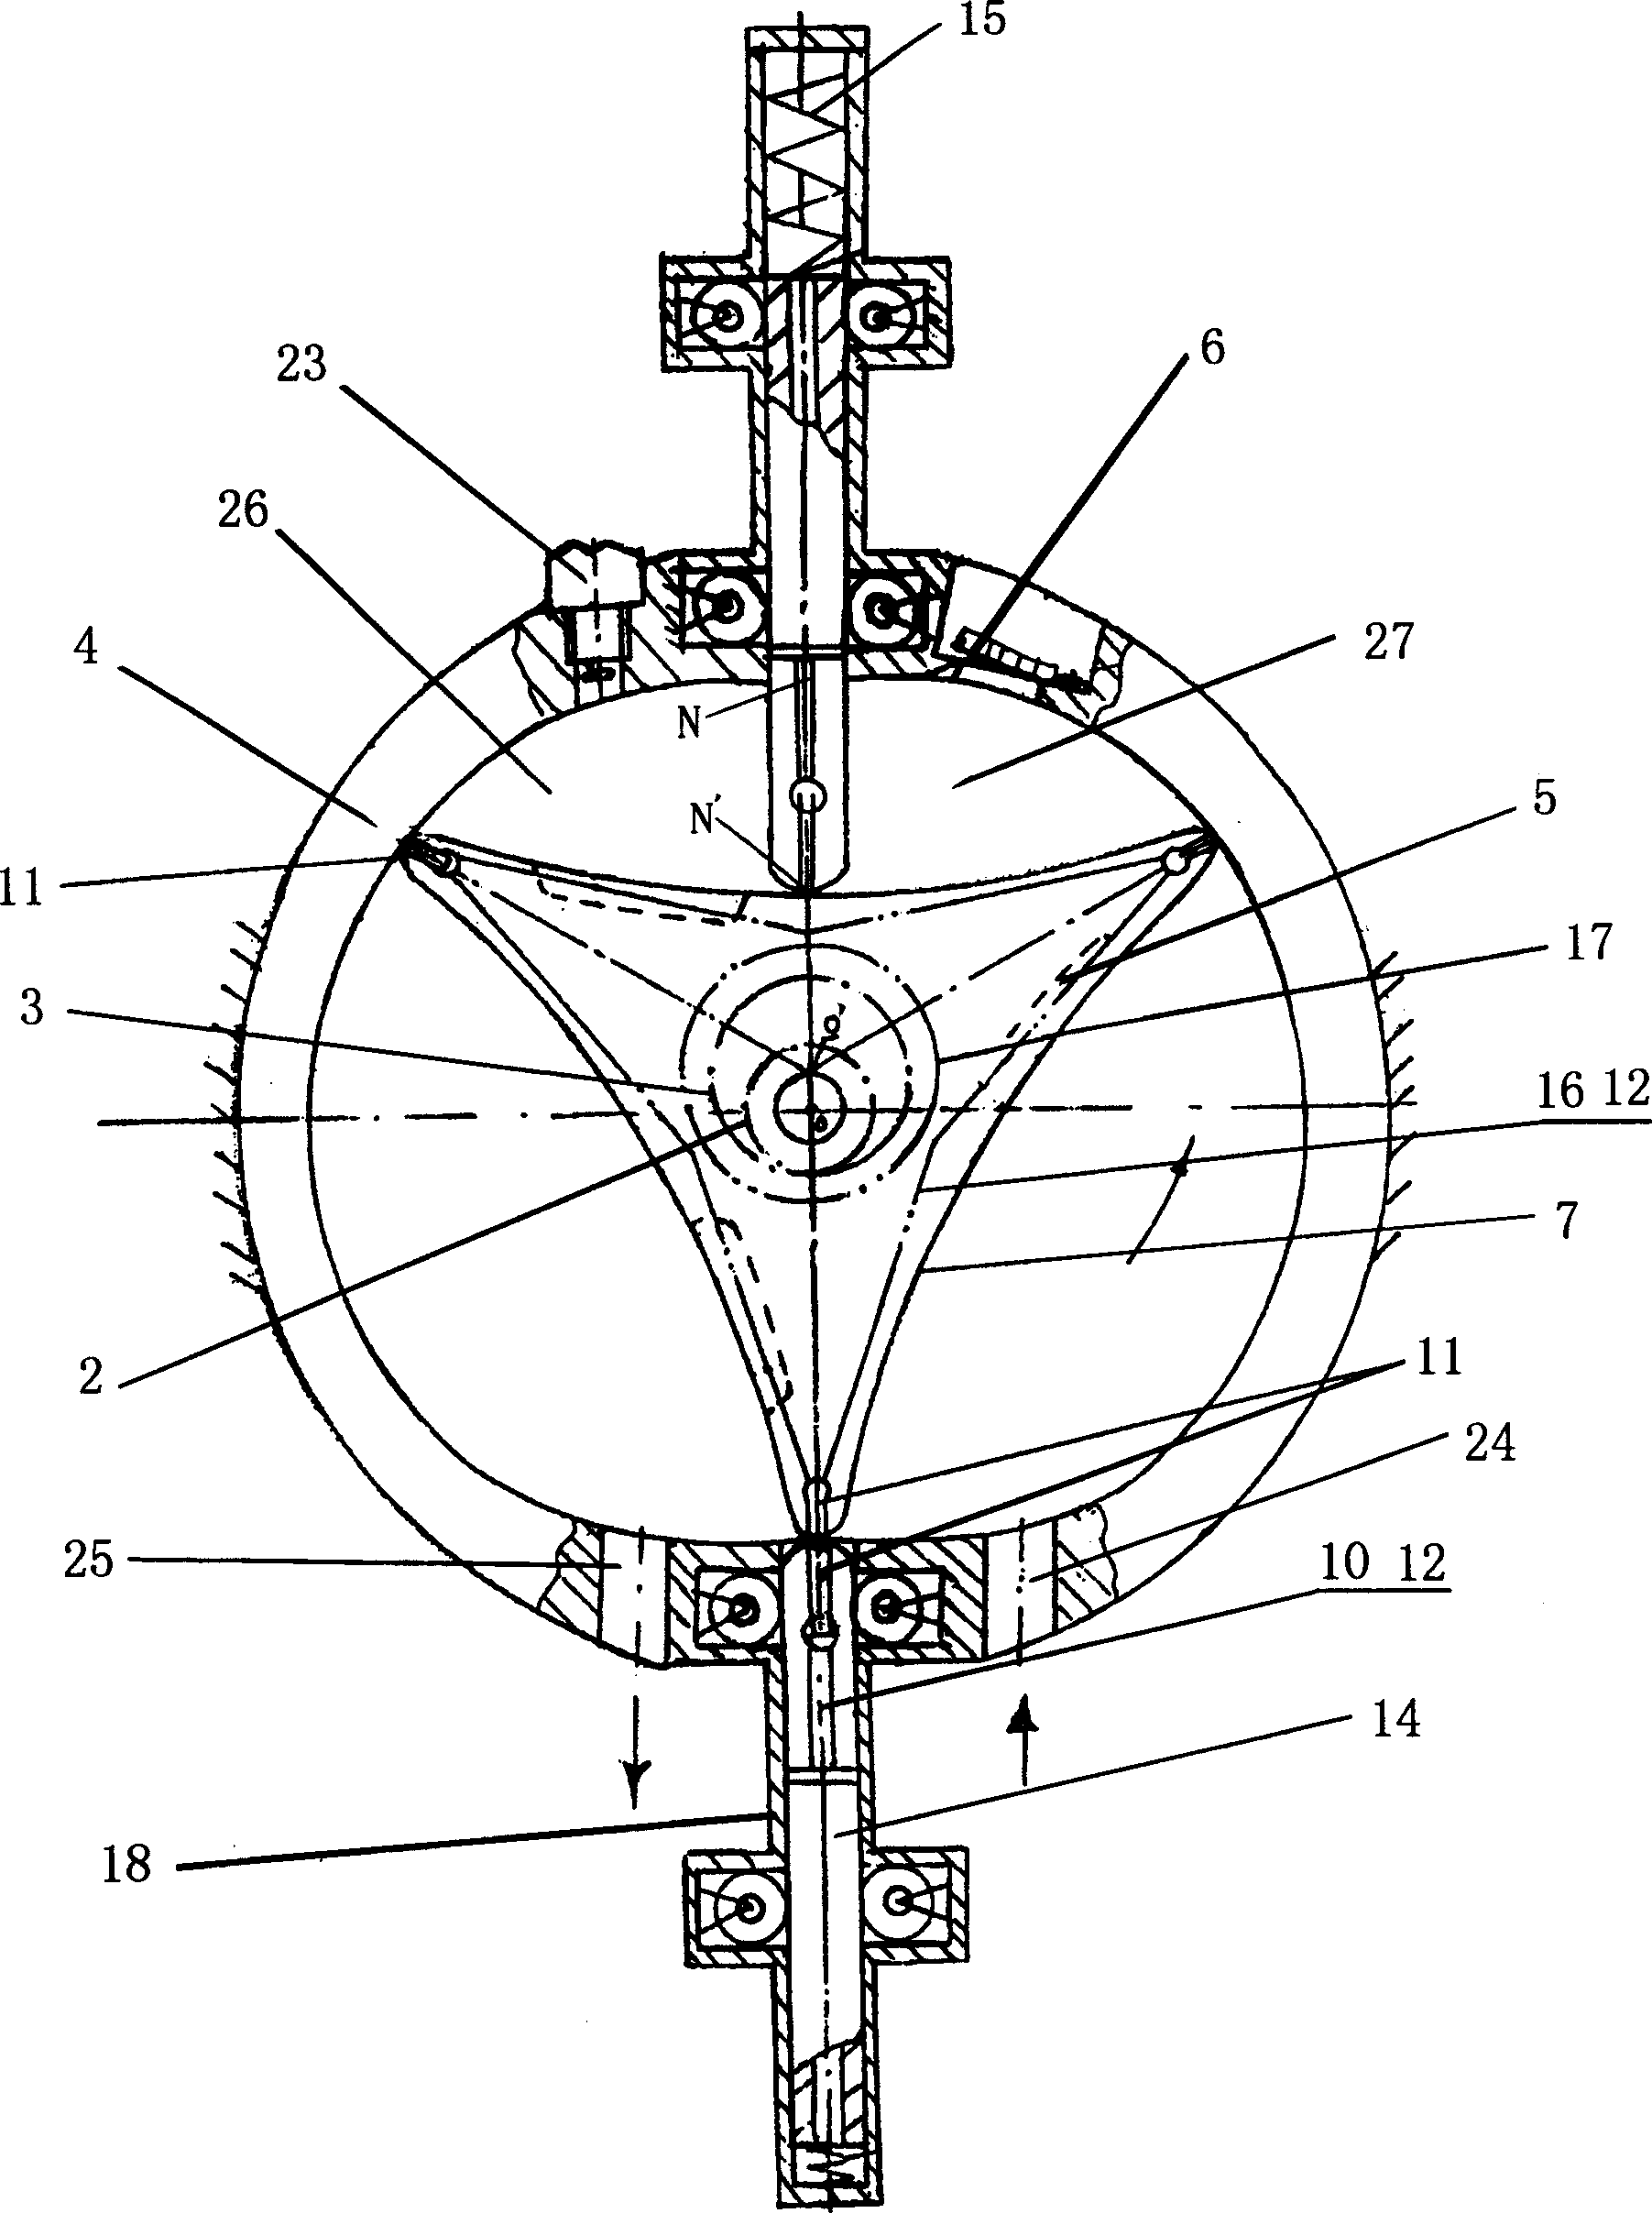 Concave triangle rotor engine